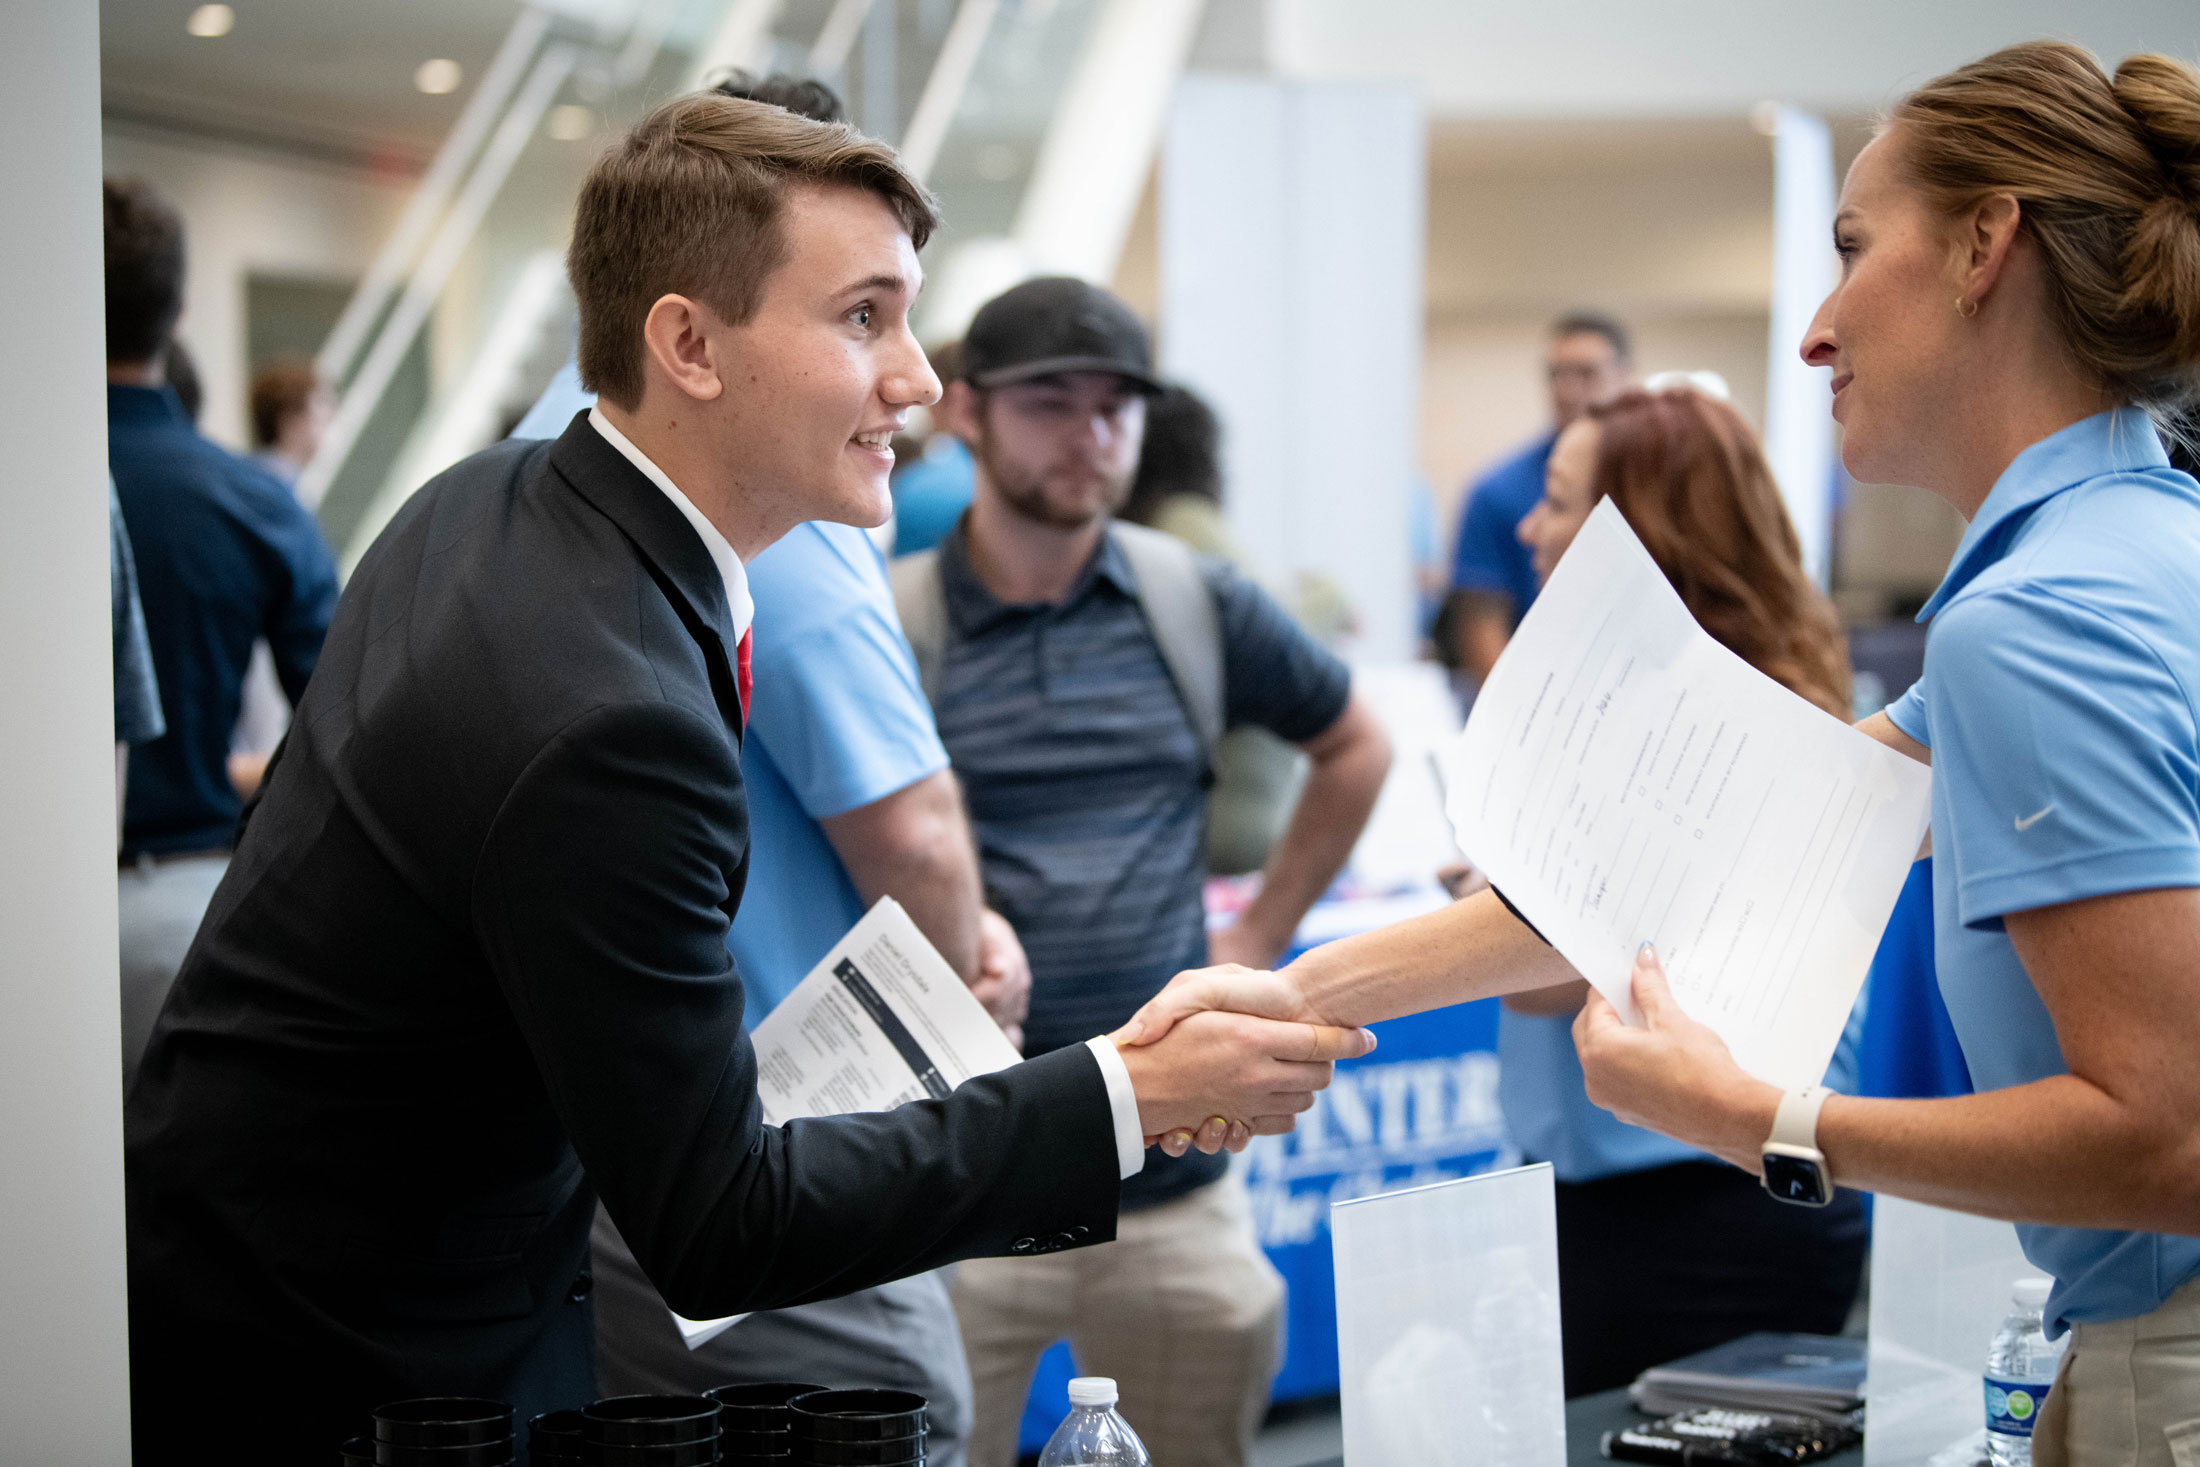 Florida Poly students shine at annual career fair featuring top STEM employers